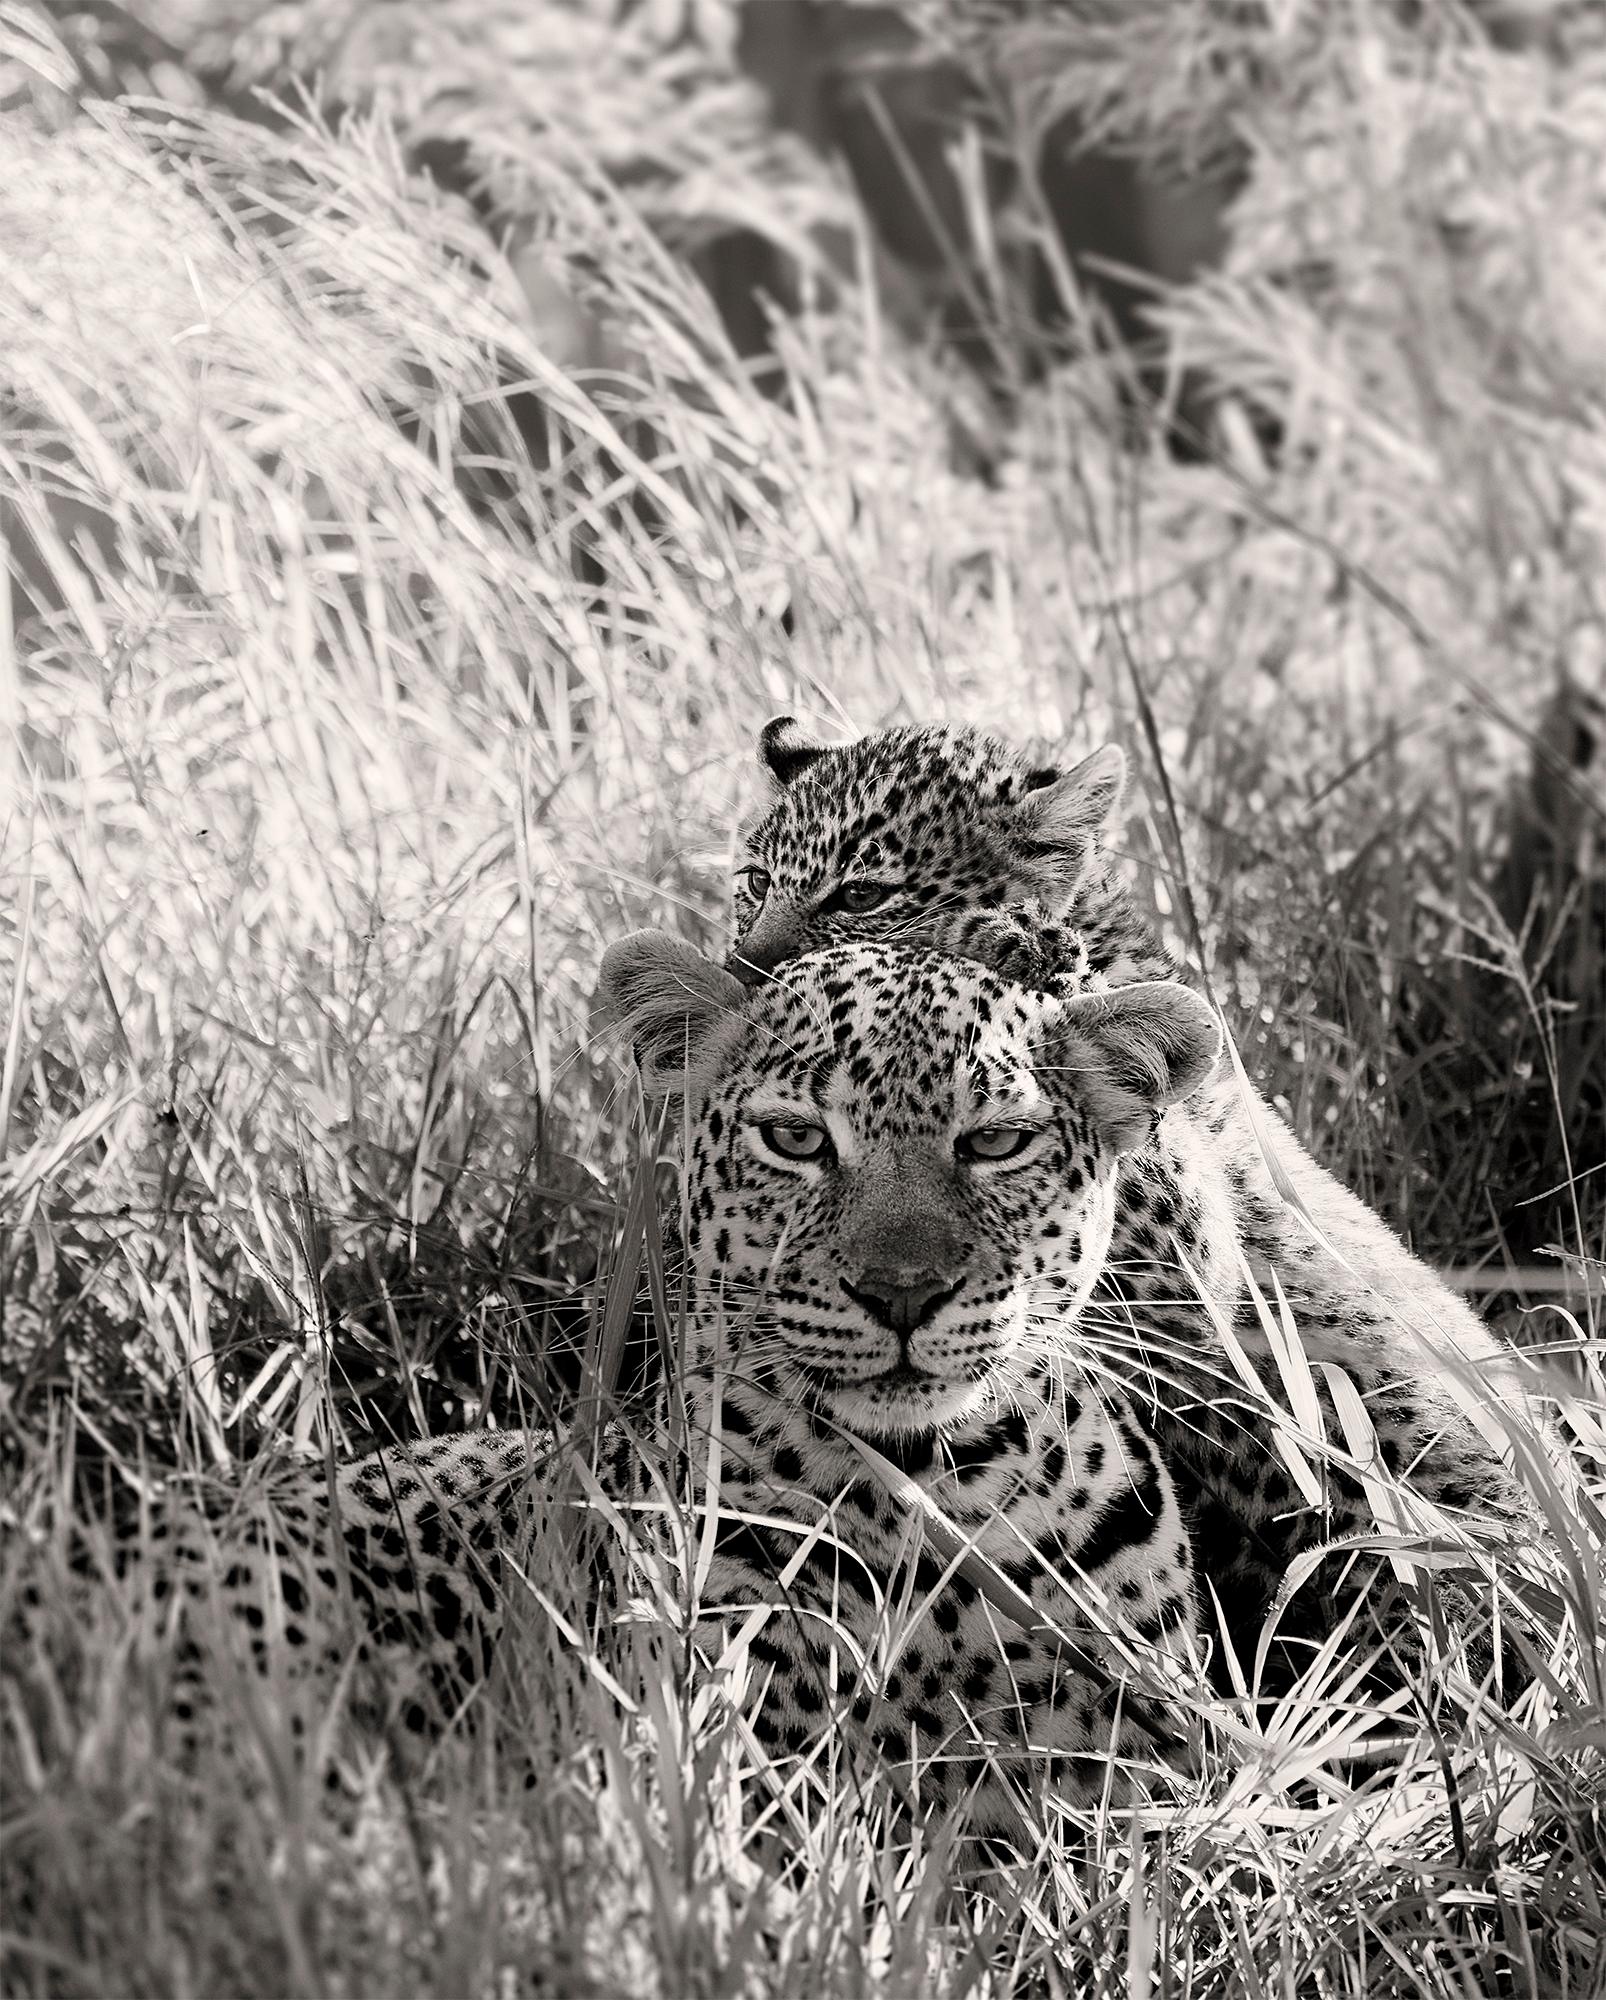 Joachim Schmeisser Portrait Photograph - Leopard Lady and baby, animal, wildlife, black and white photography, africa